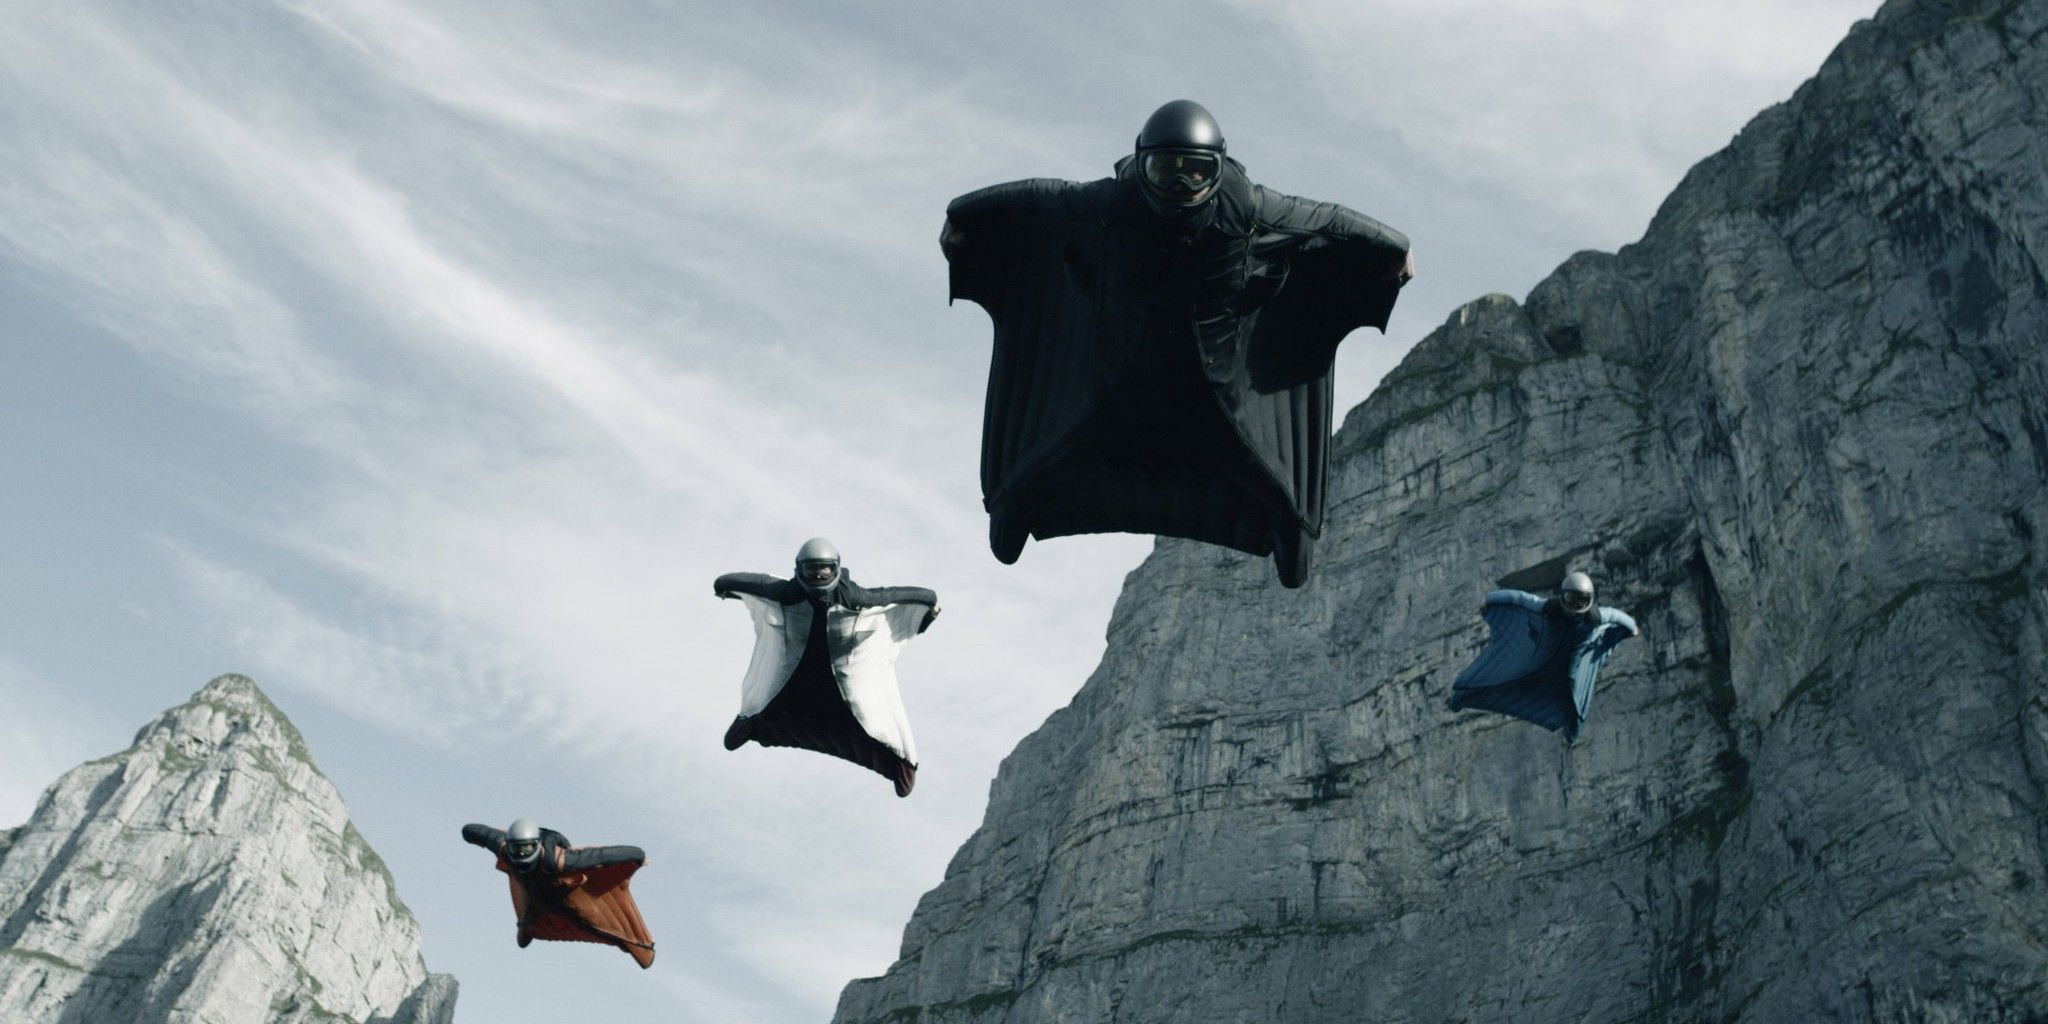 The thieves going wingsuit diving in Point Break (2015).